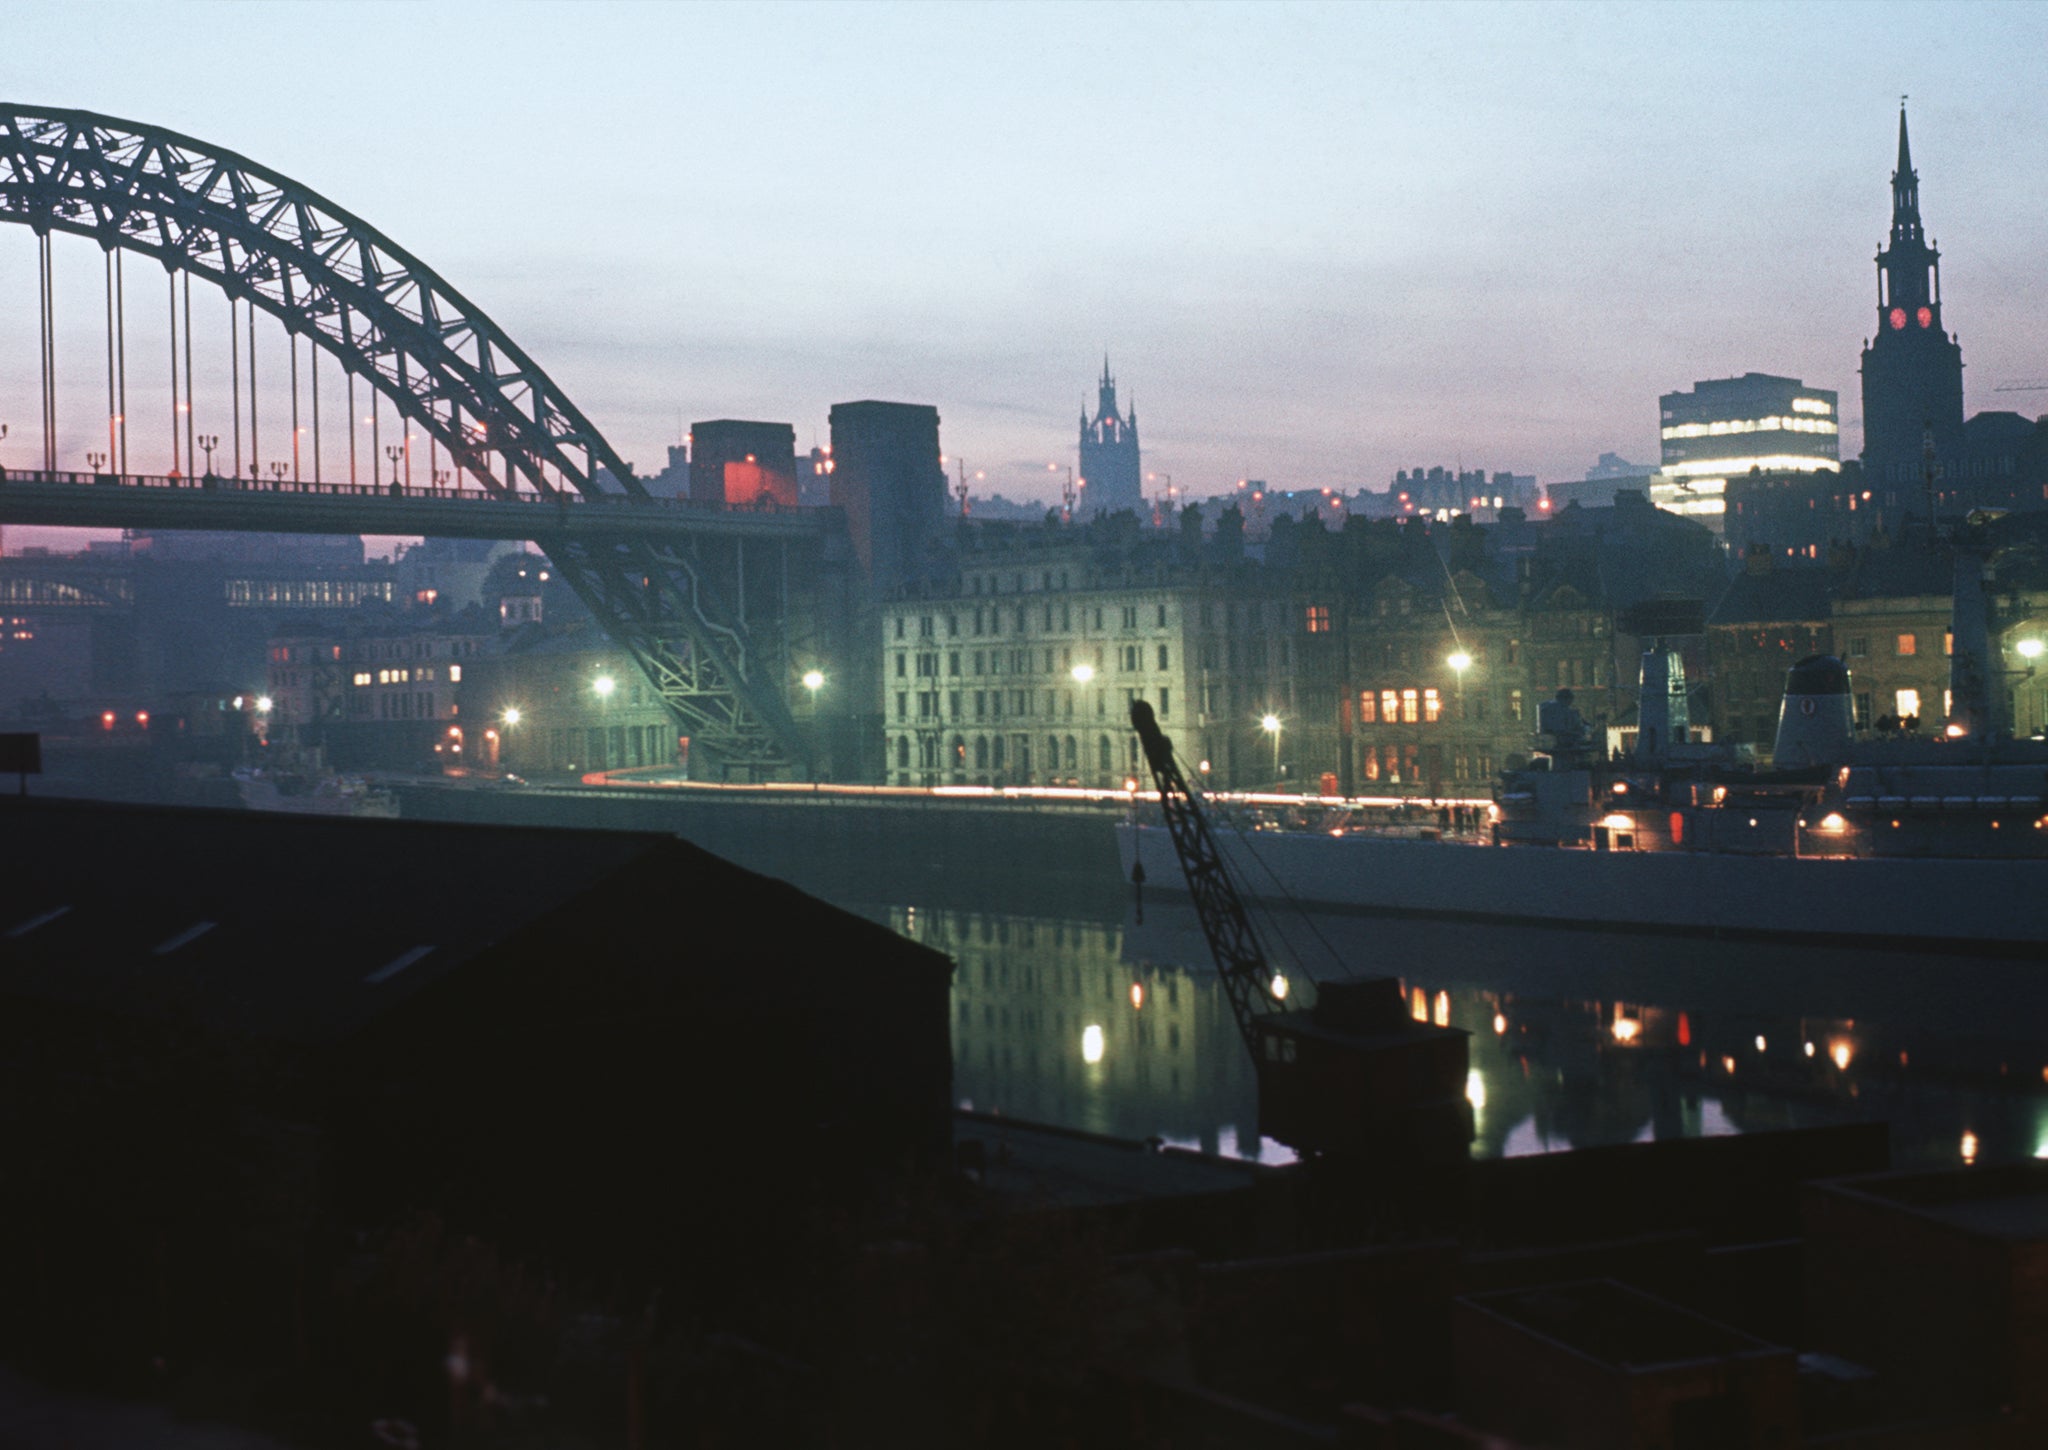 Thanks to Geordie Shore, we know Newcastle makes for a great night out